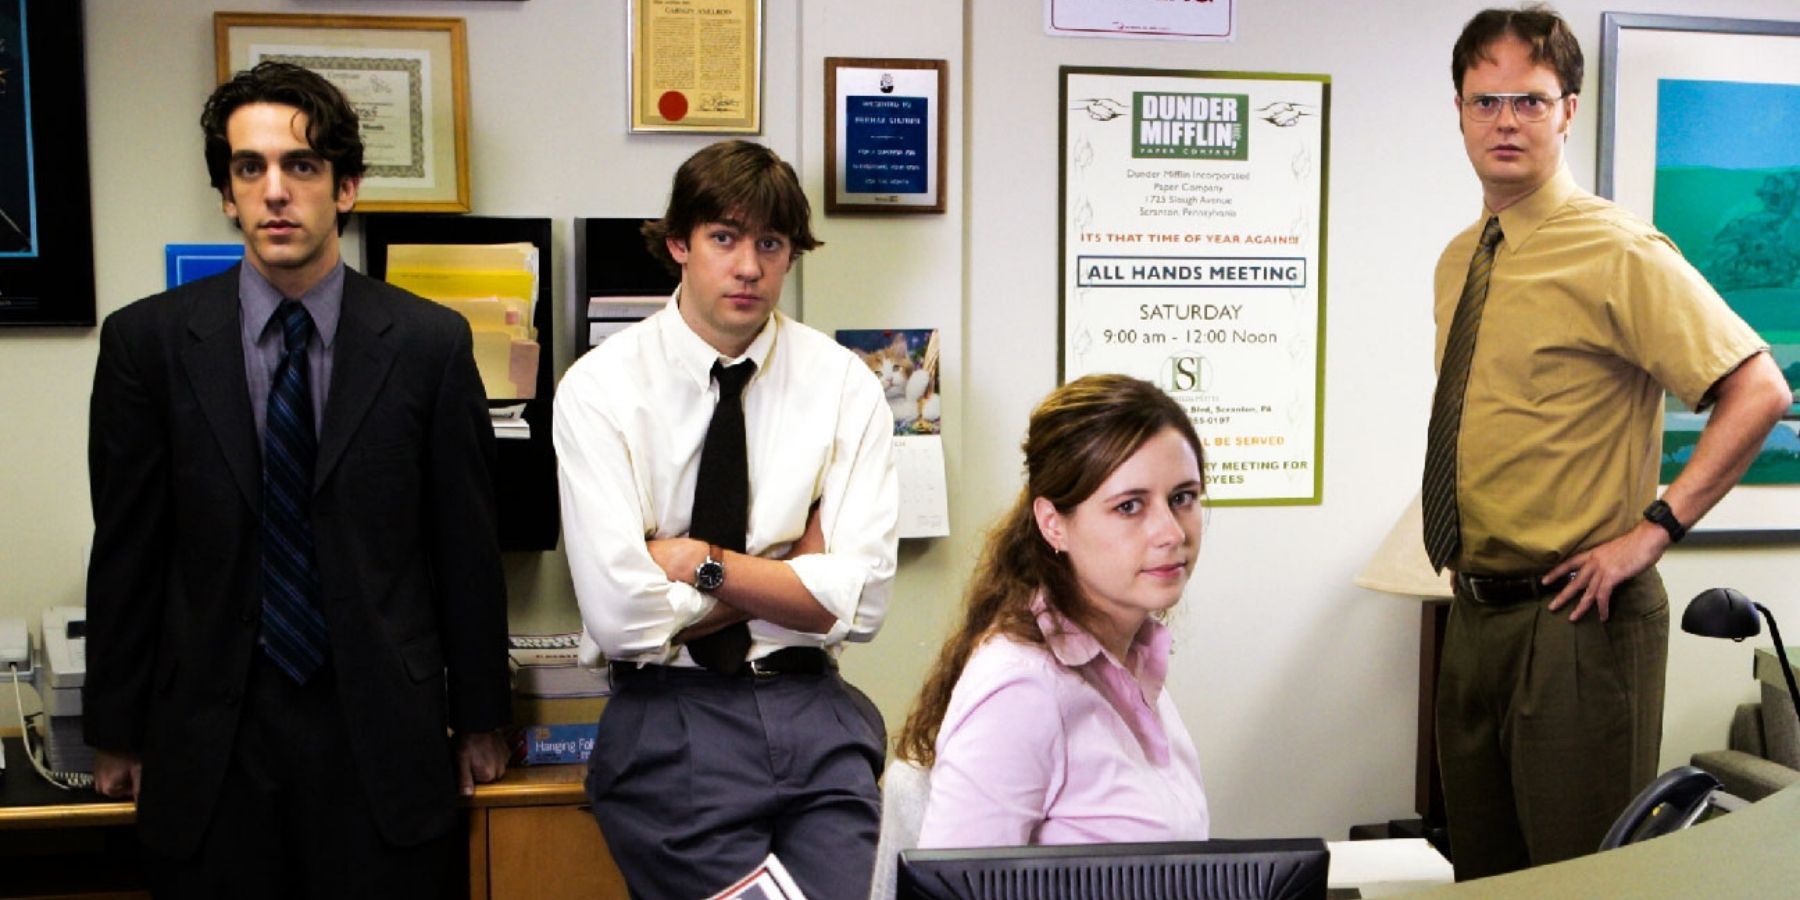 The early cast of The Office